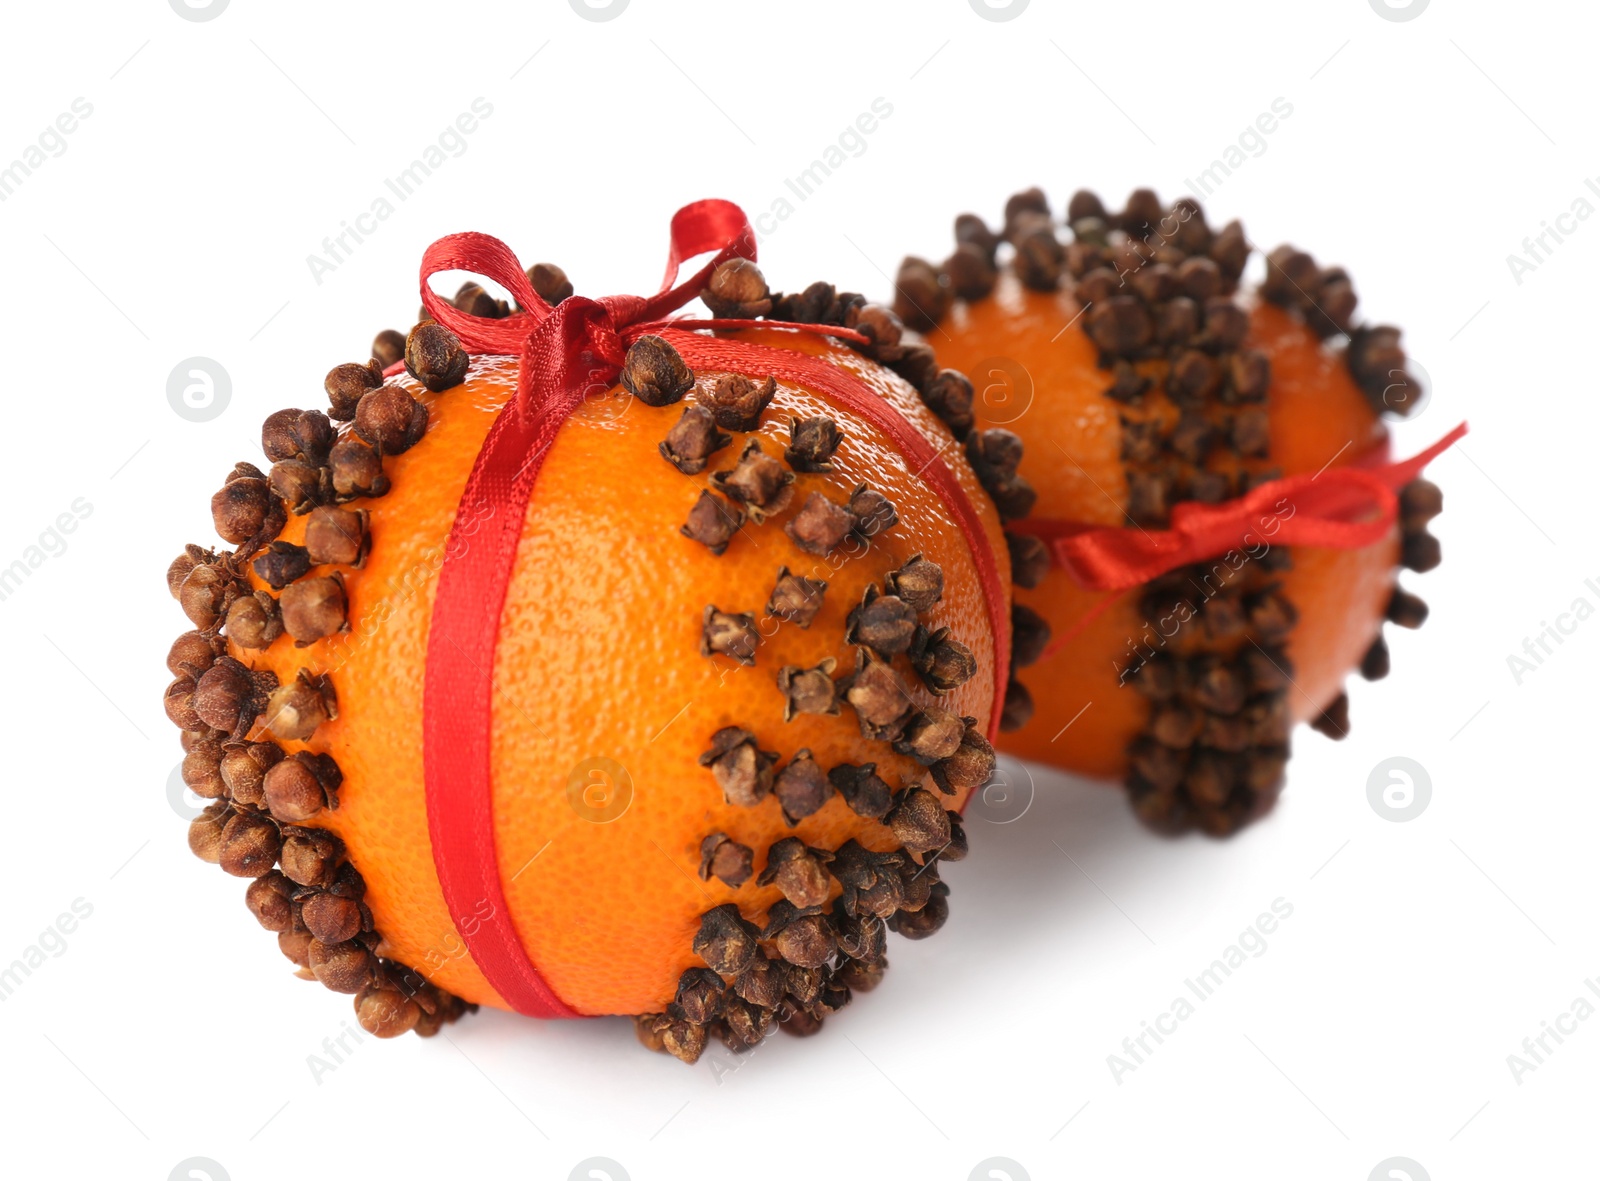 Photo of Pomander balls with red ribbons made of fresh tangerines and cloves on white background